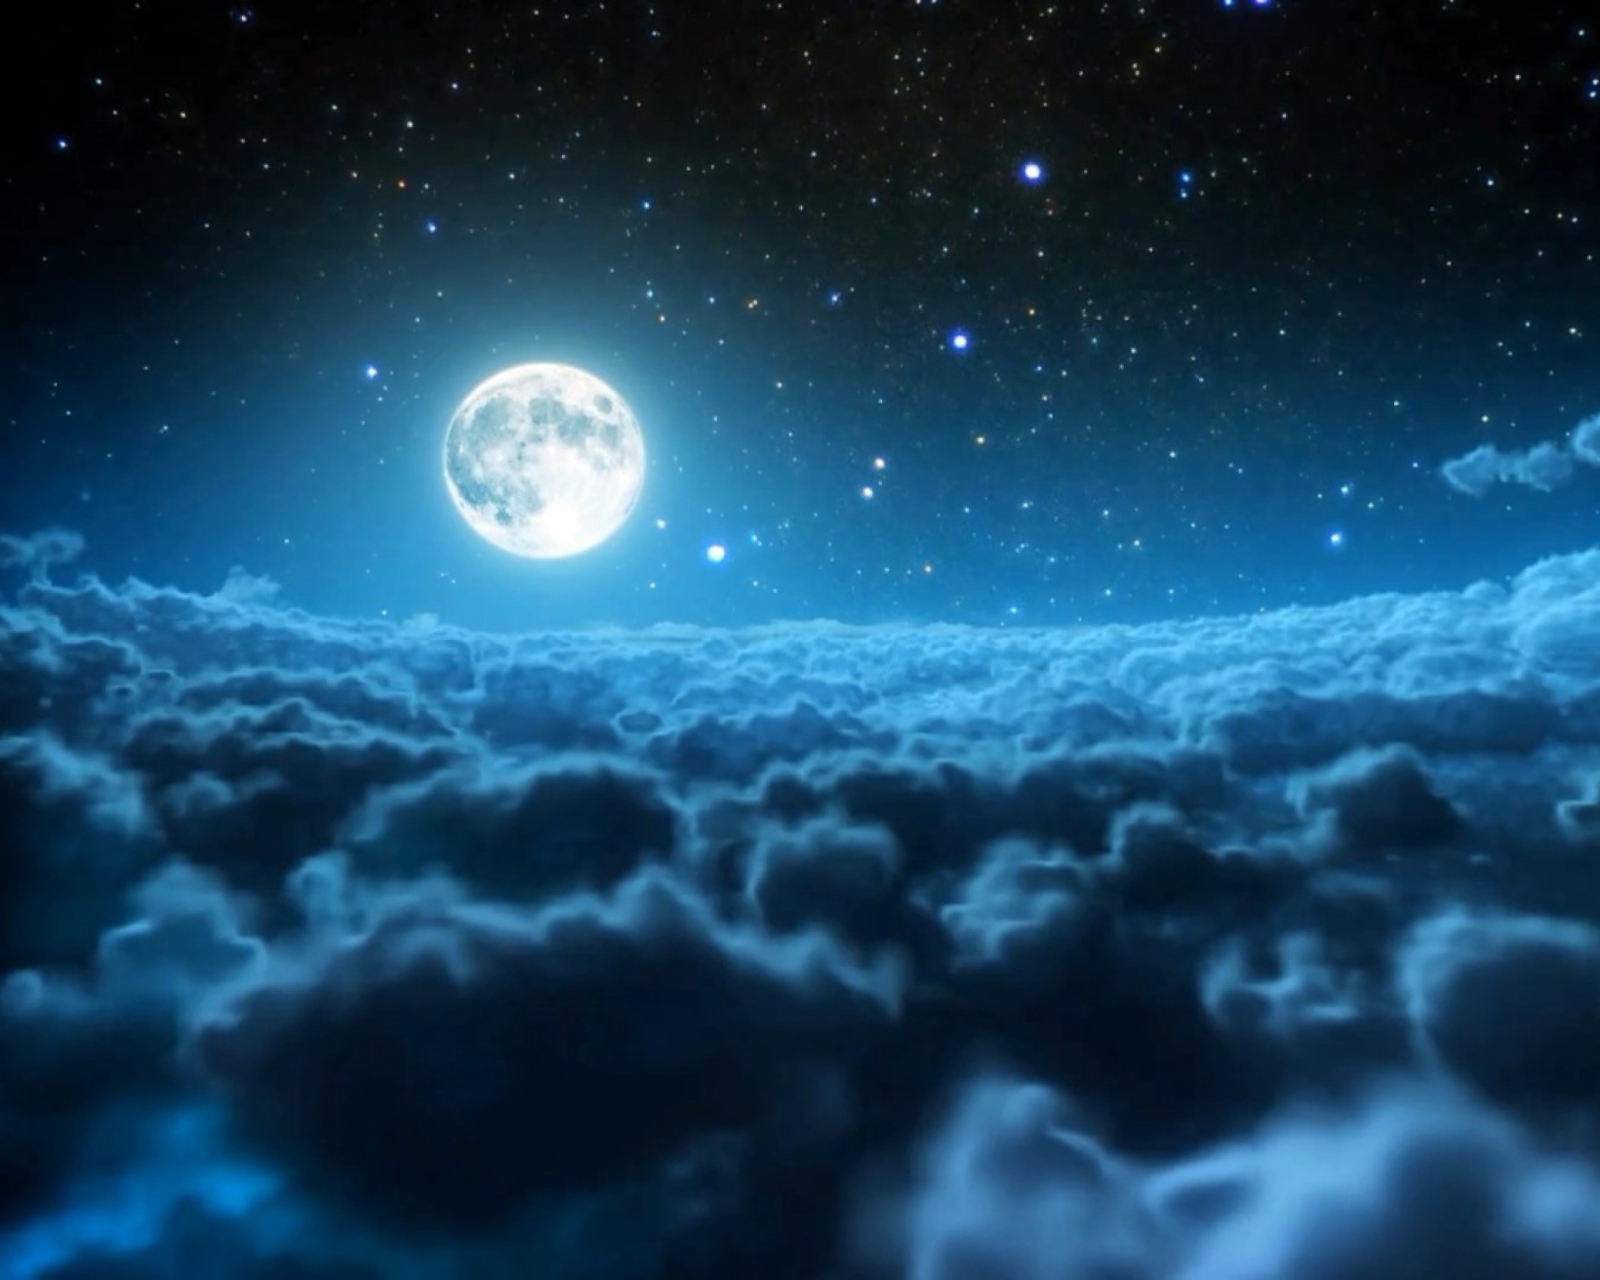 Cloudy Night And Sparkling Moon wallpaper 1600x1280